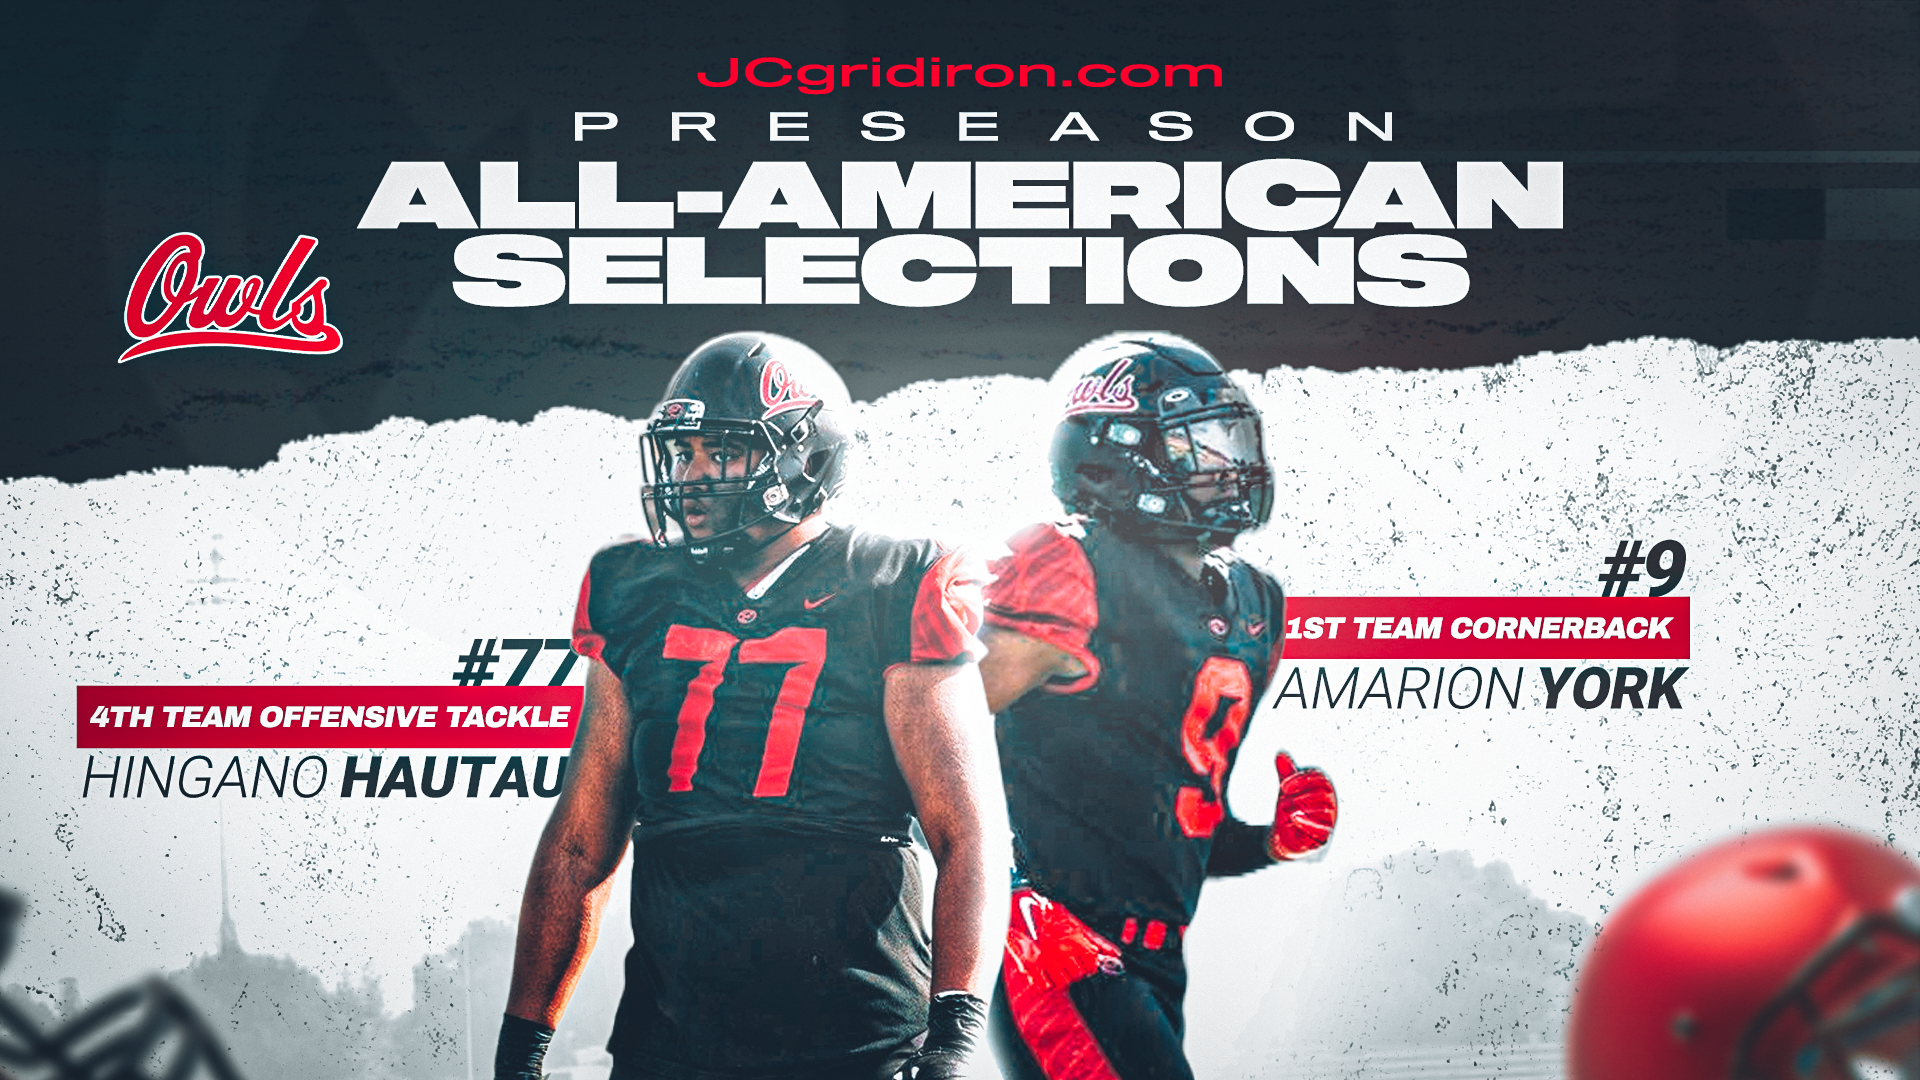 Two football players in black jerseys in the middle. All-American Selections in white text above them.